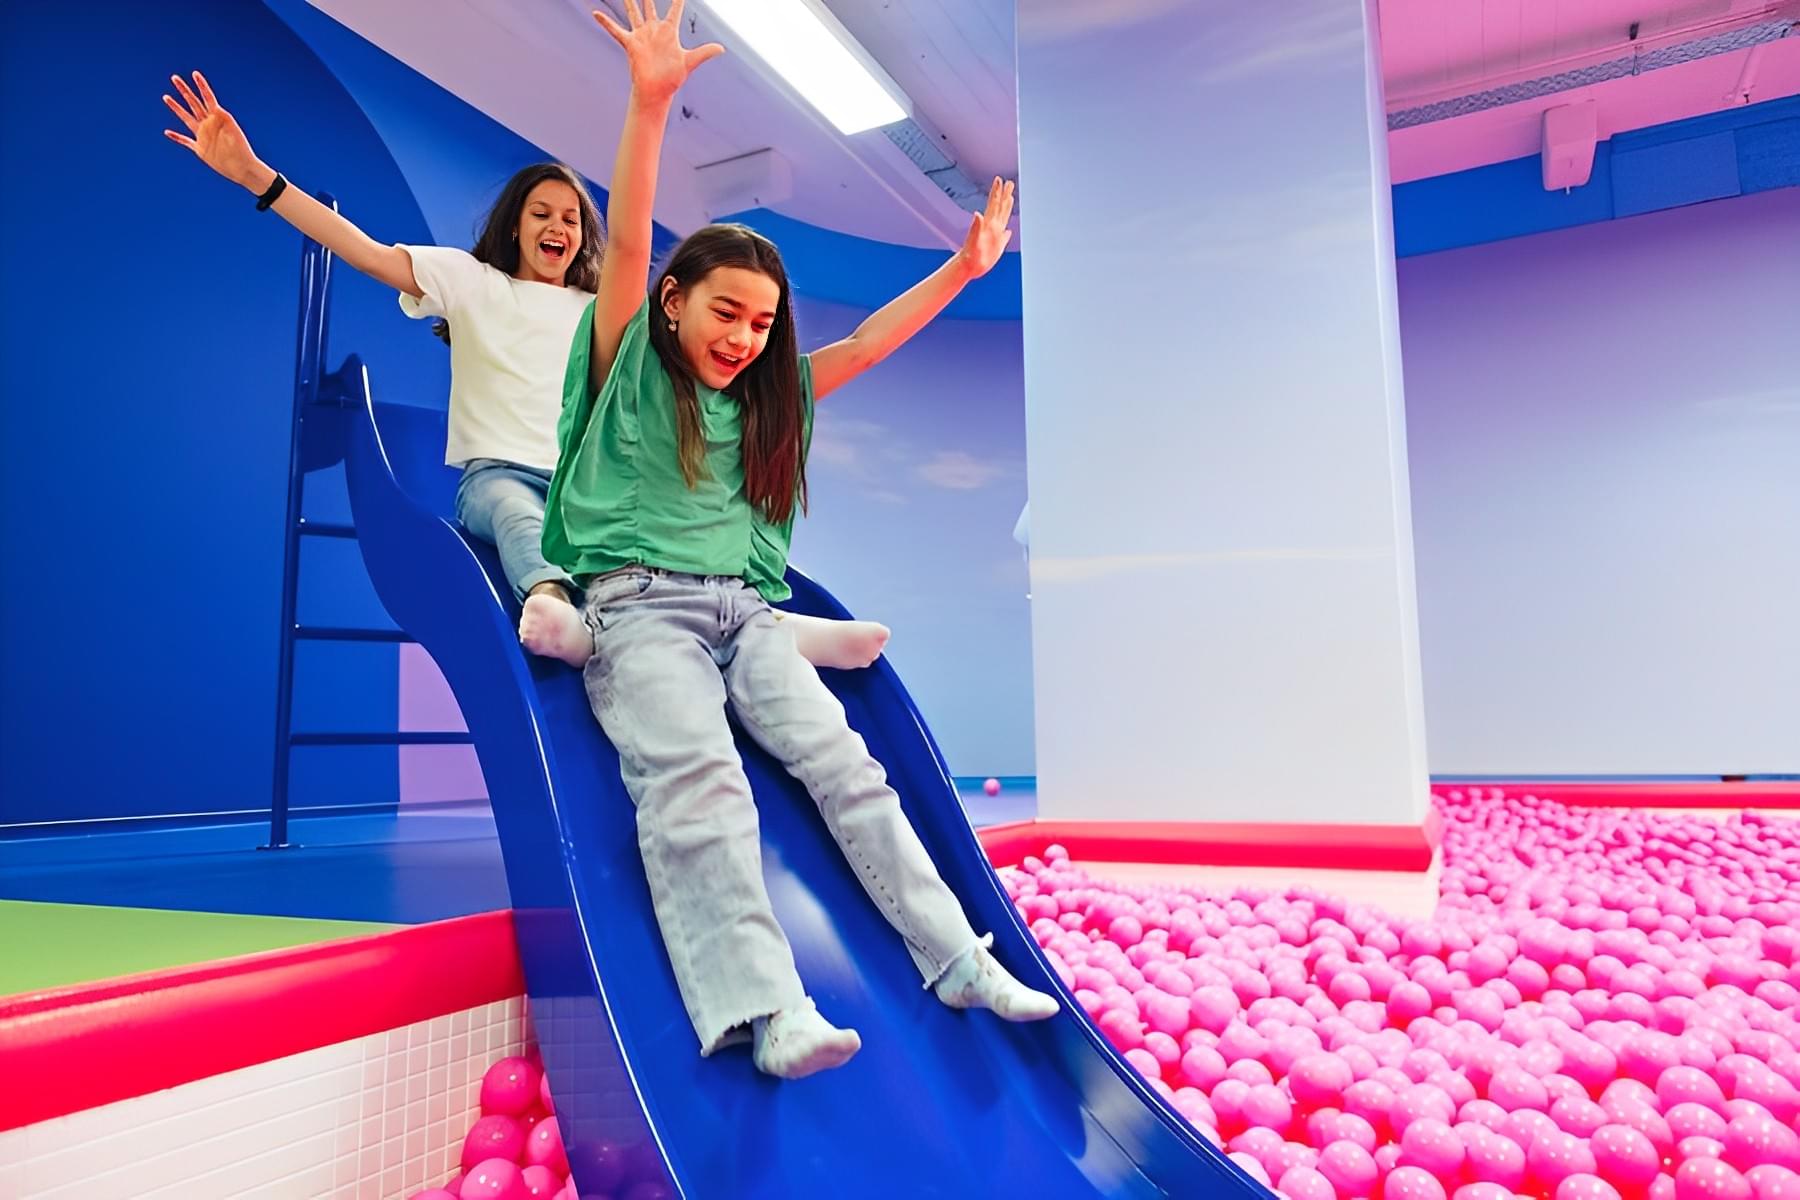 Enjoy sliding down in the pit of balls along with your friends 